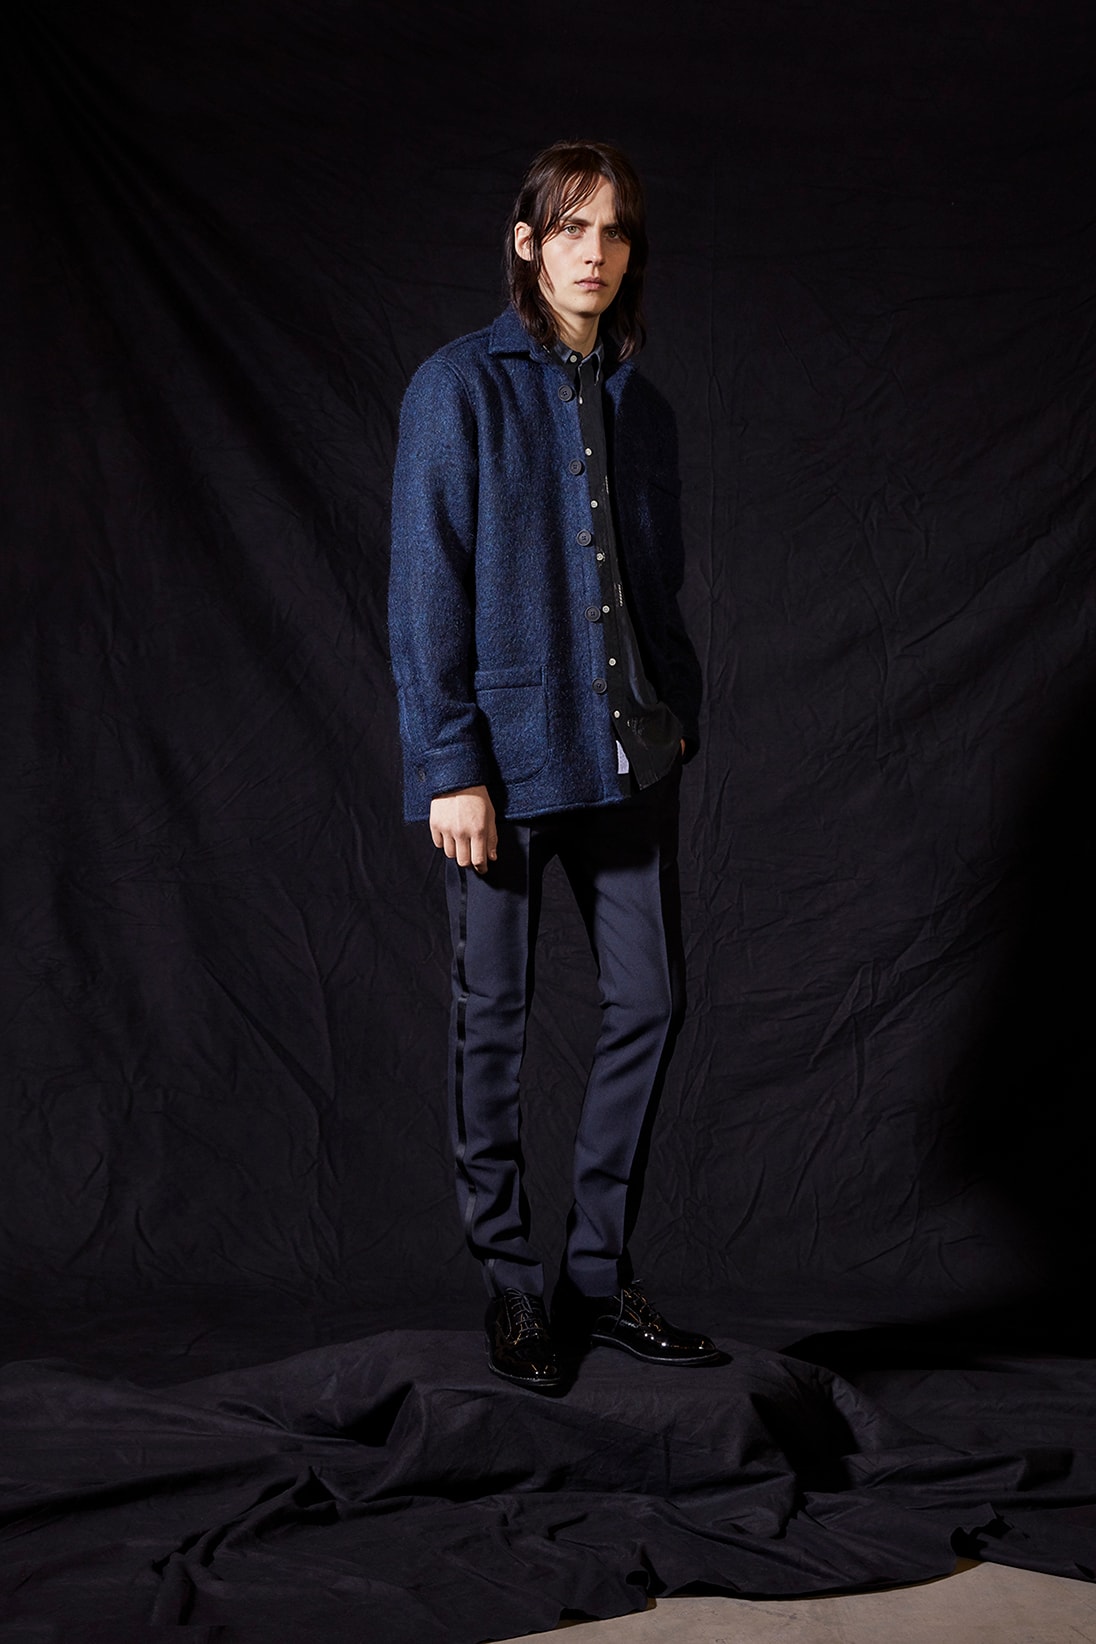 Schnayderman's Fall/Winter 2018 Lookbook Collection Ian Curtis Joy Division The Cure Robert Smith New Wave Inspired Fashion Shirts Overshirts Jackets Stockholm